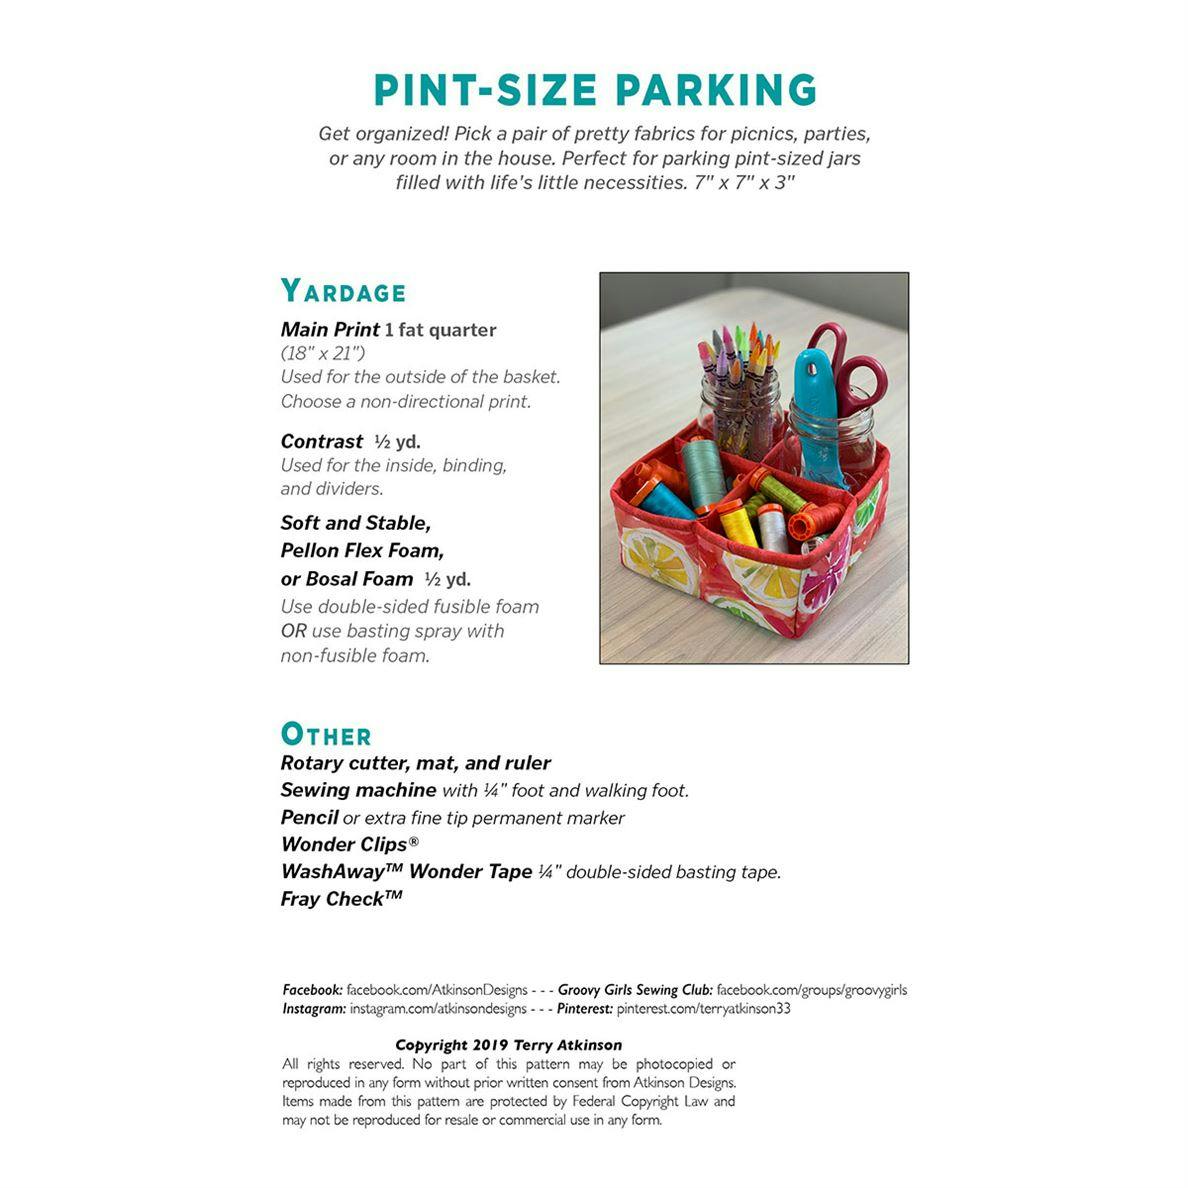 List of supplies for Pint Sized Parking